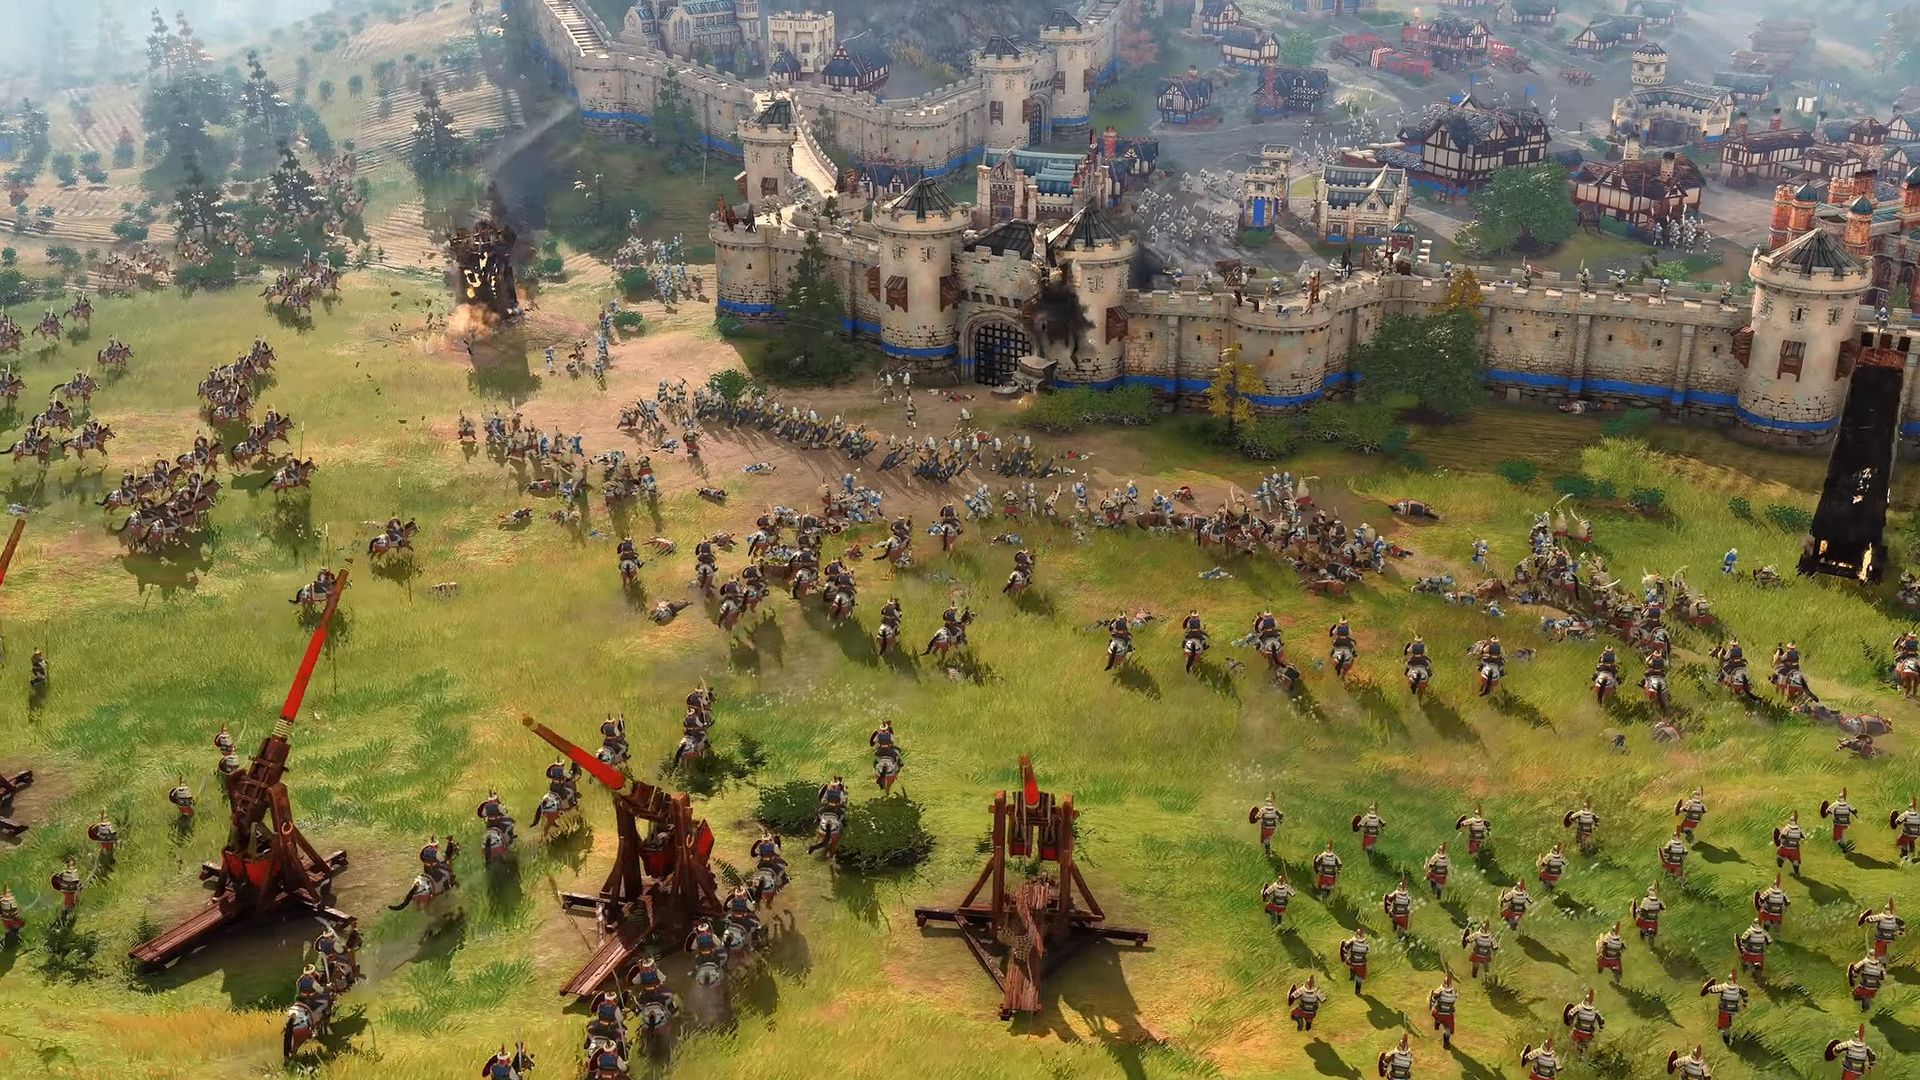 Age of Empires 4 2022 roadmap has been revealed, starting with major